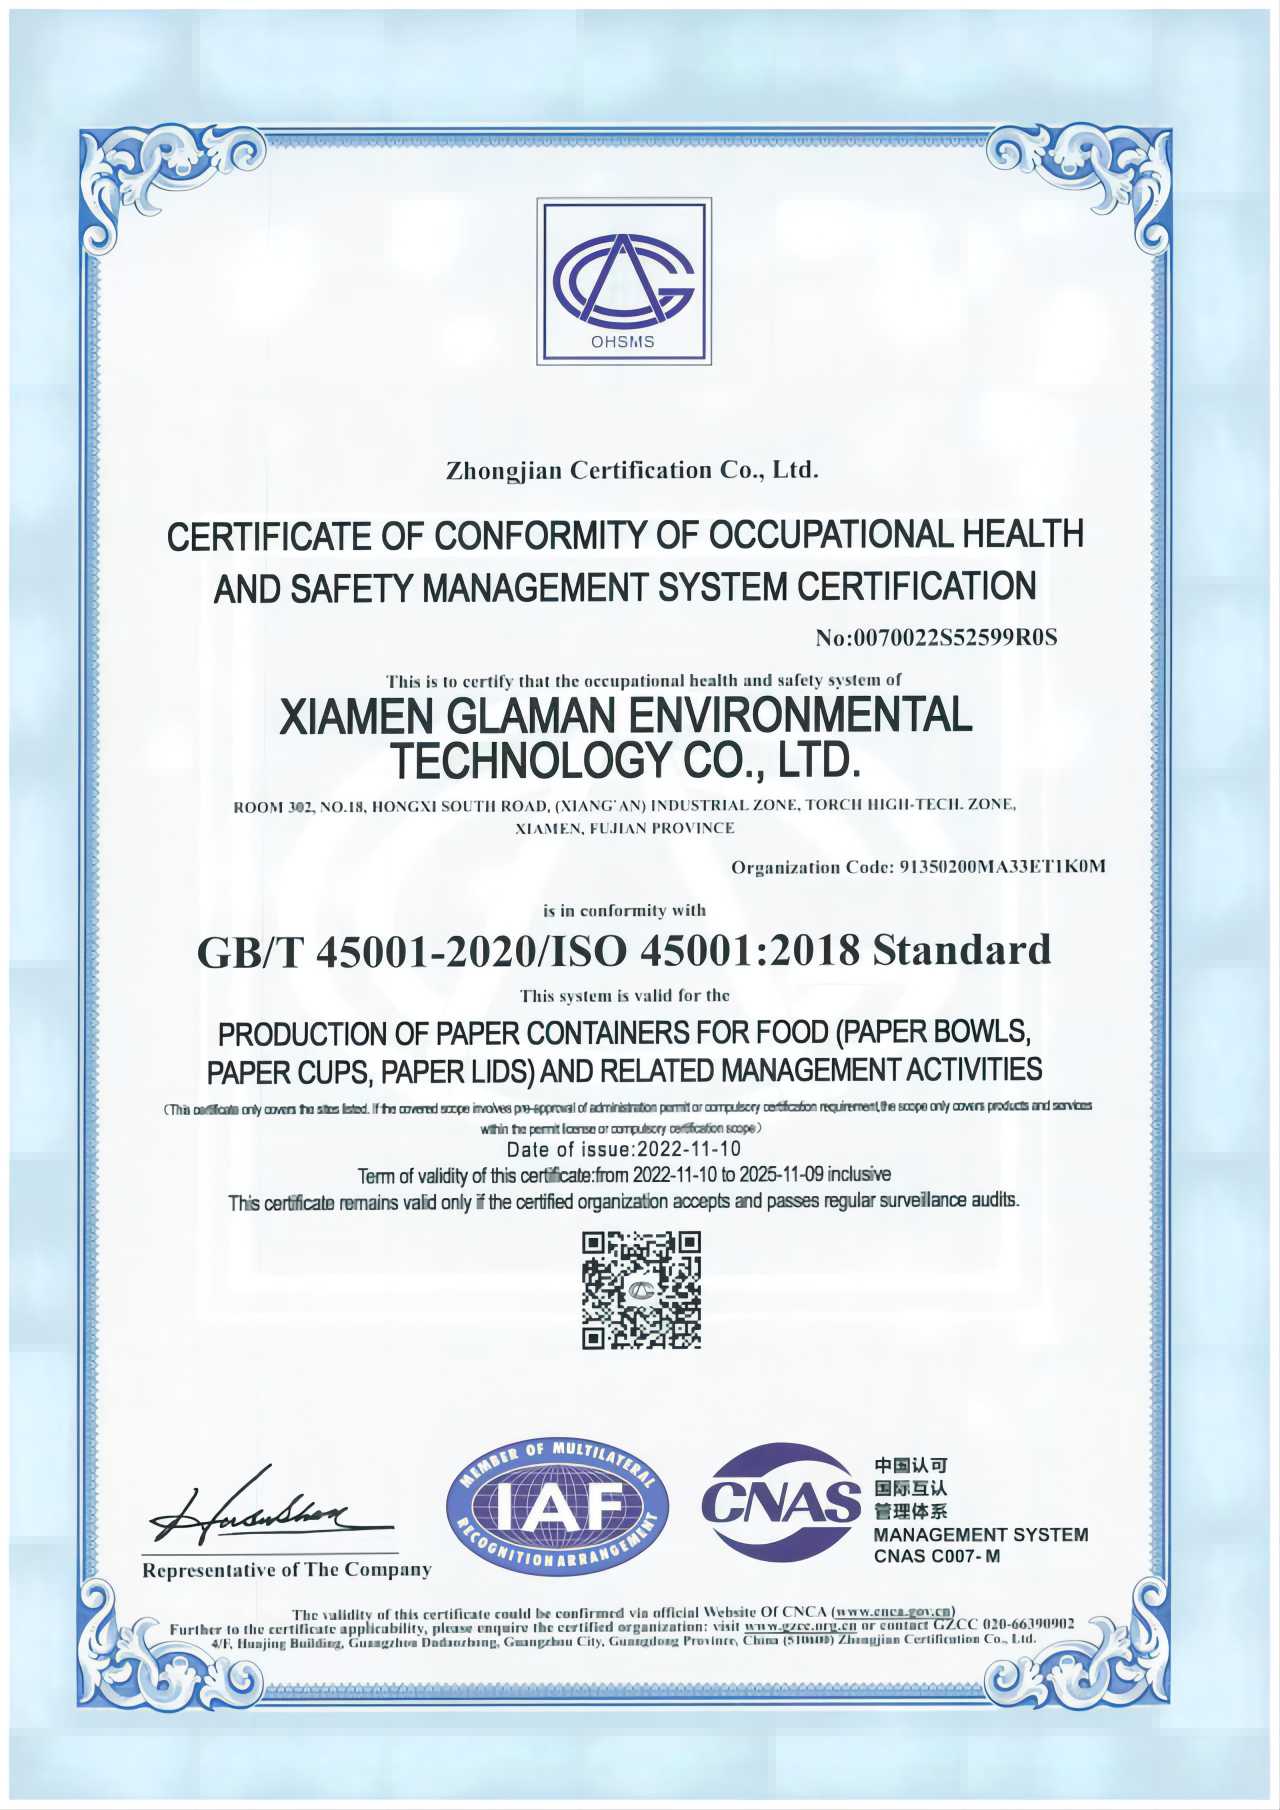 The certification of ISO45001